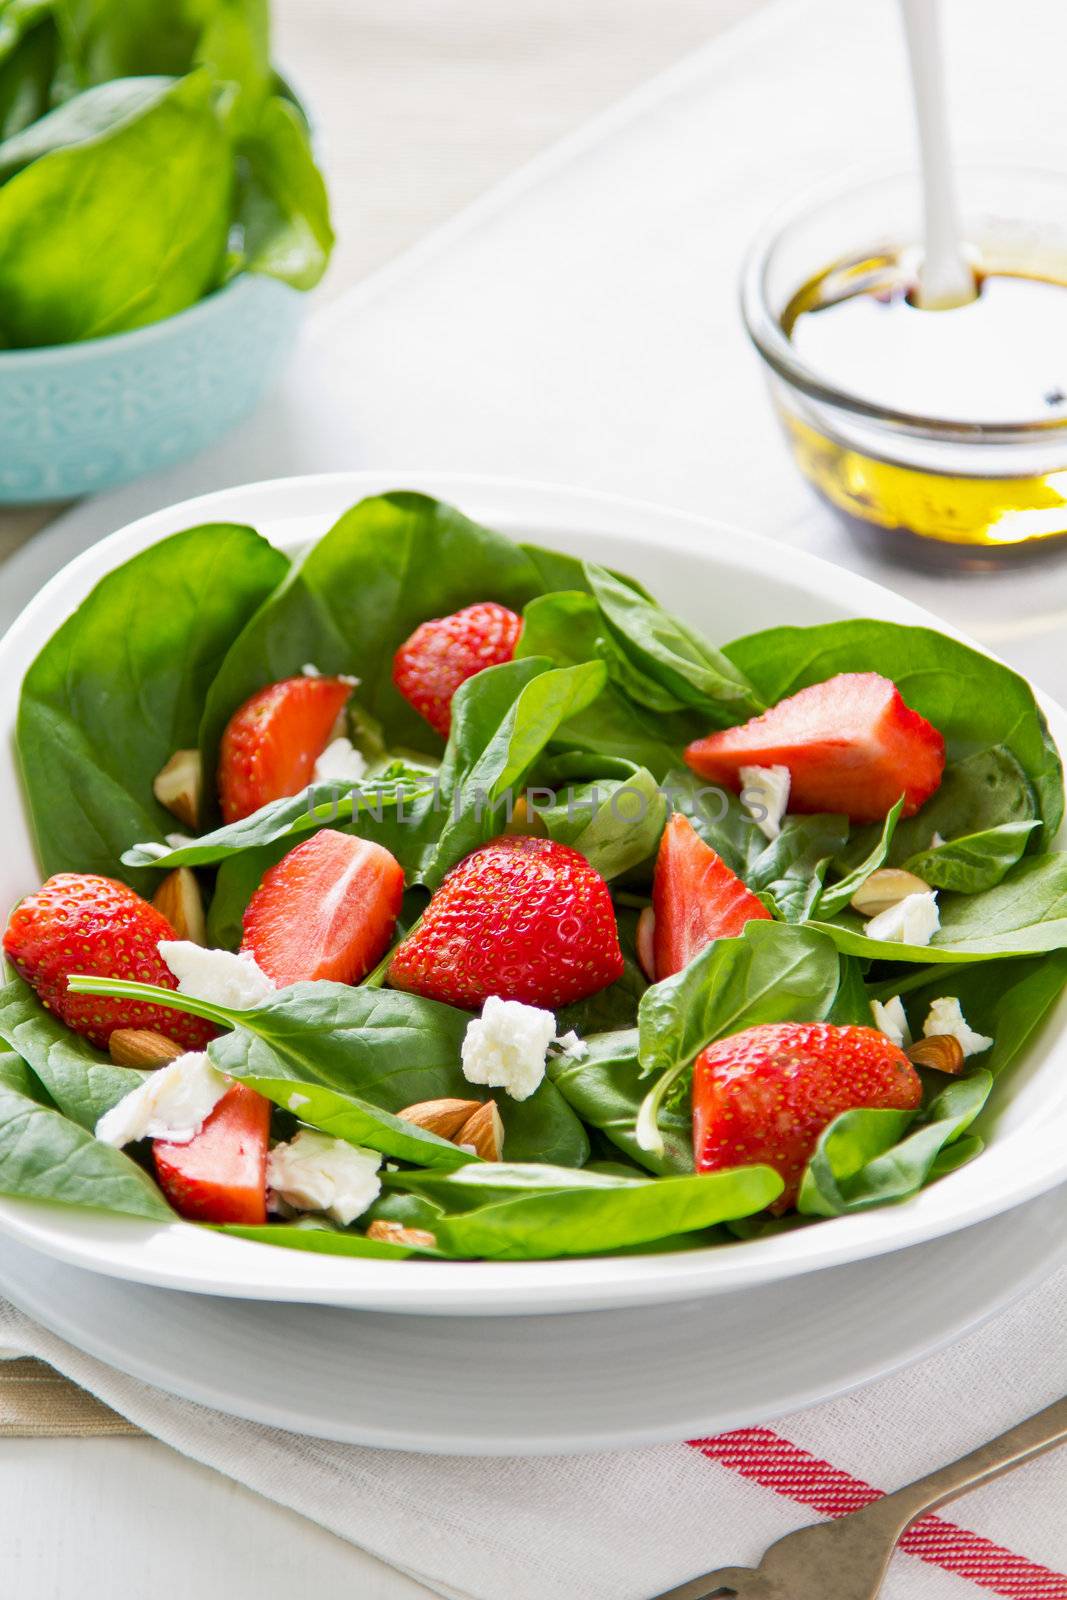 Strawberry salad by vanillaechoes